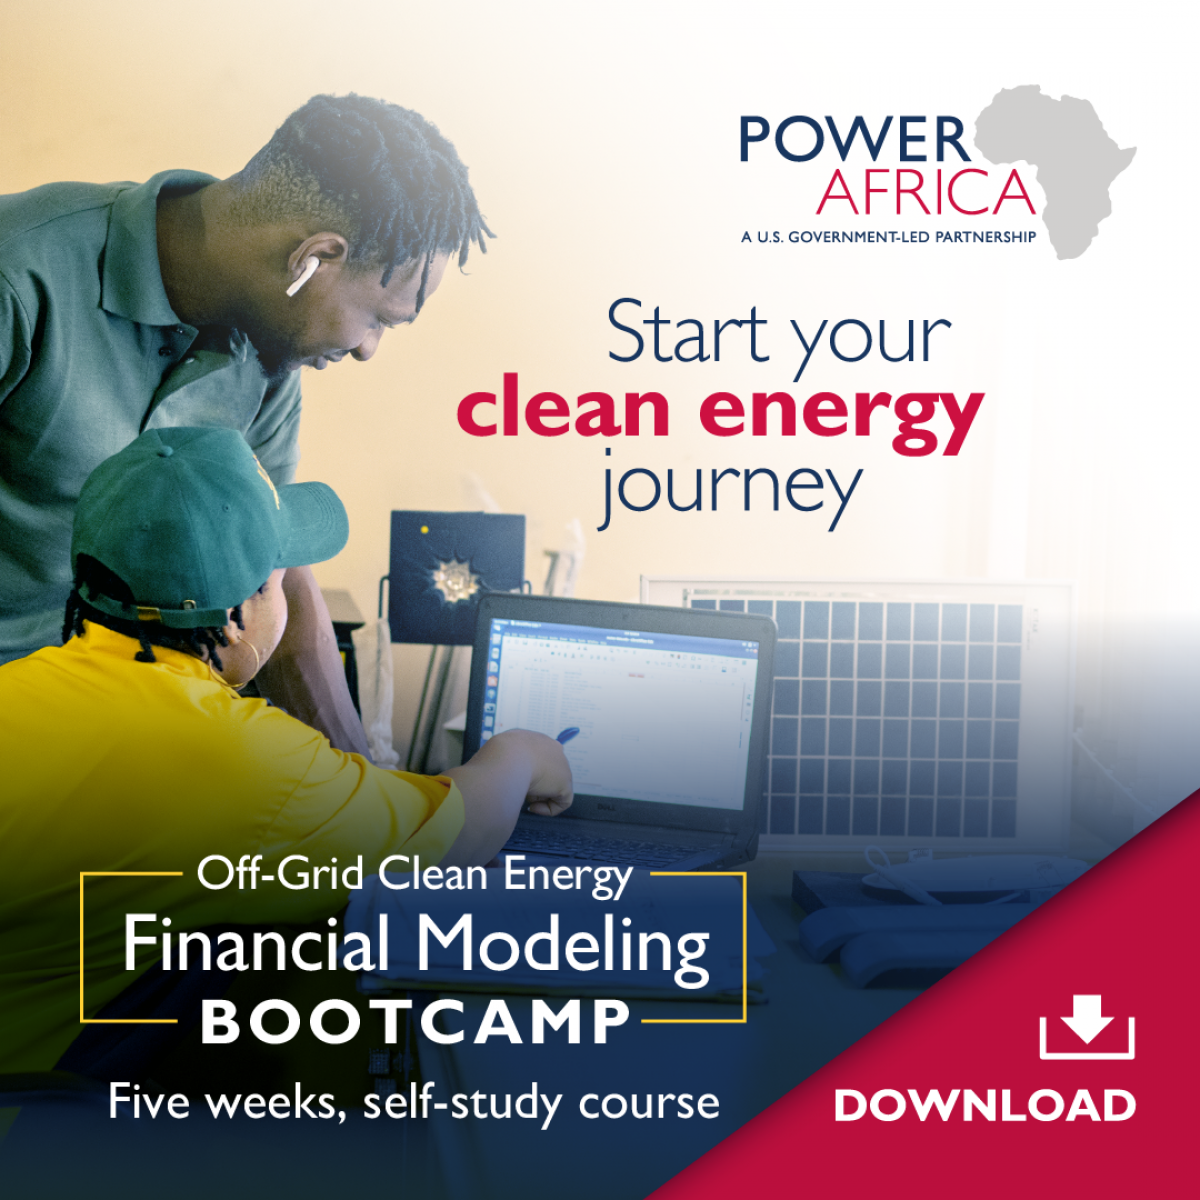 Power Africa Off-Grid Clean Energy Financial Modeling Bootcamp